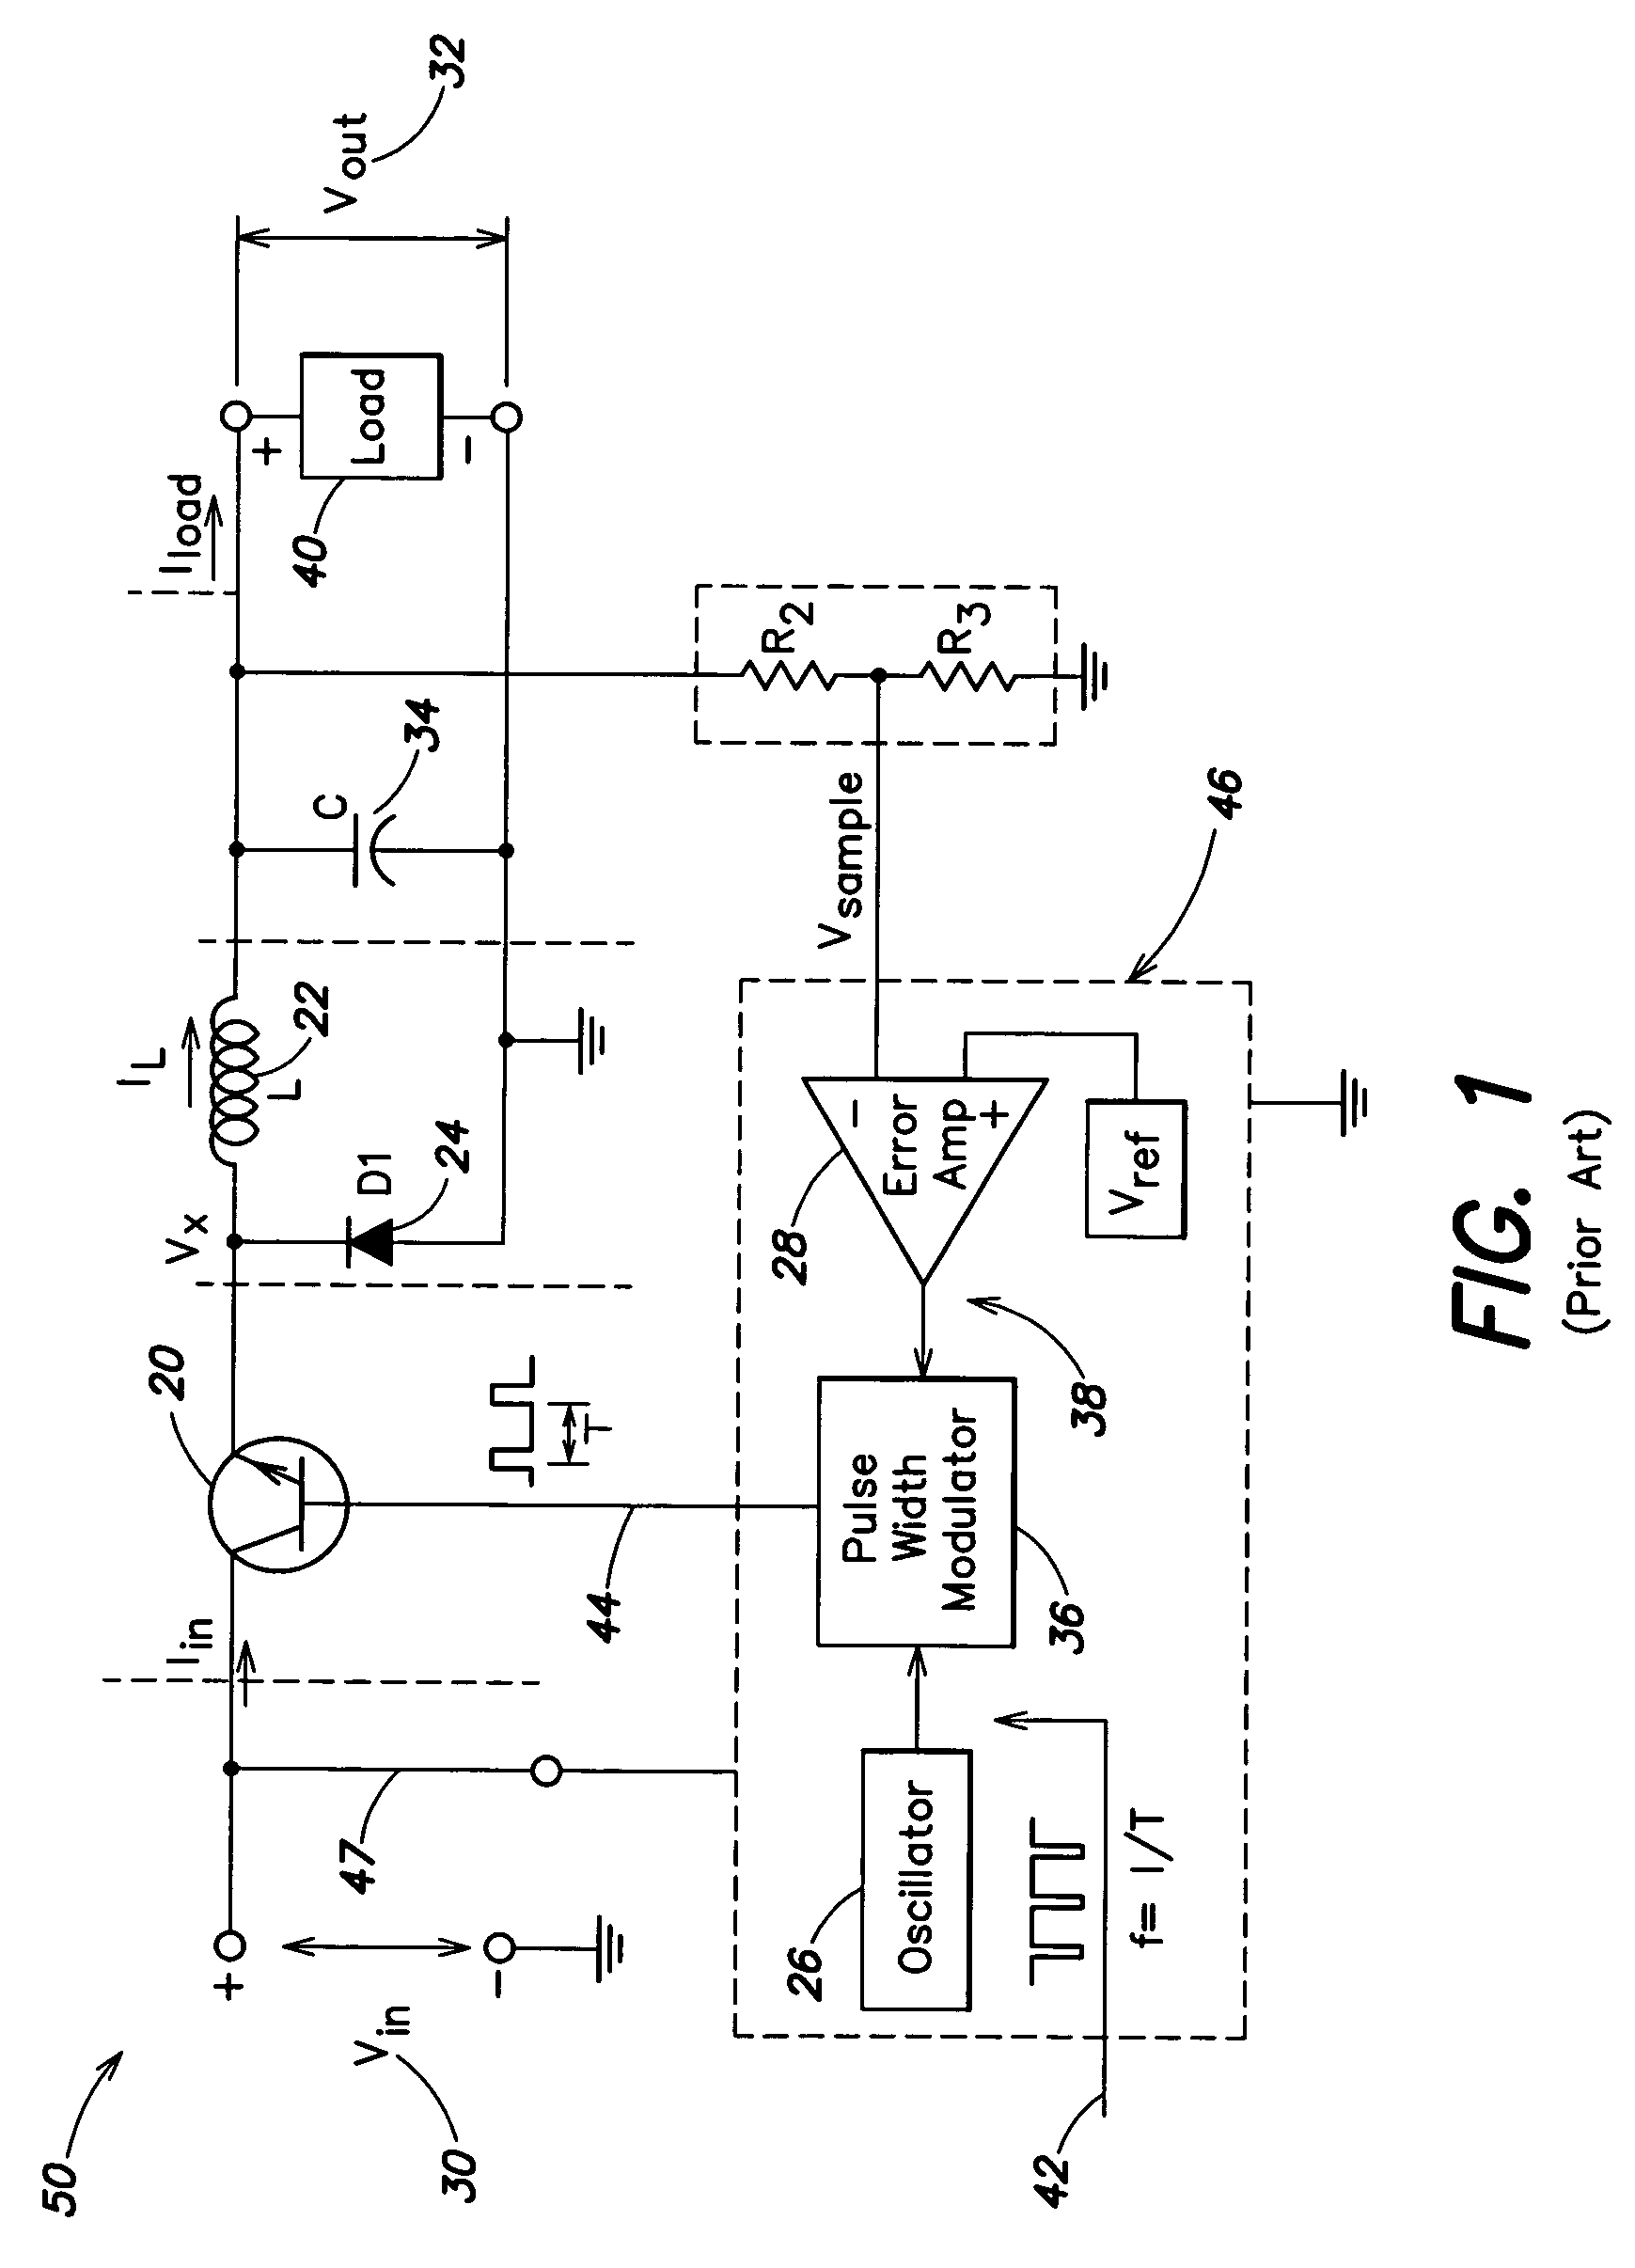 LED power control methods and apparatus